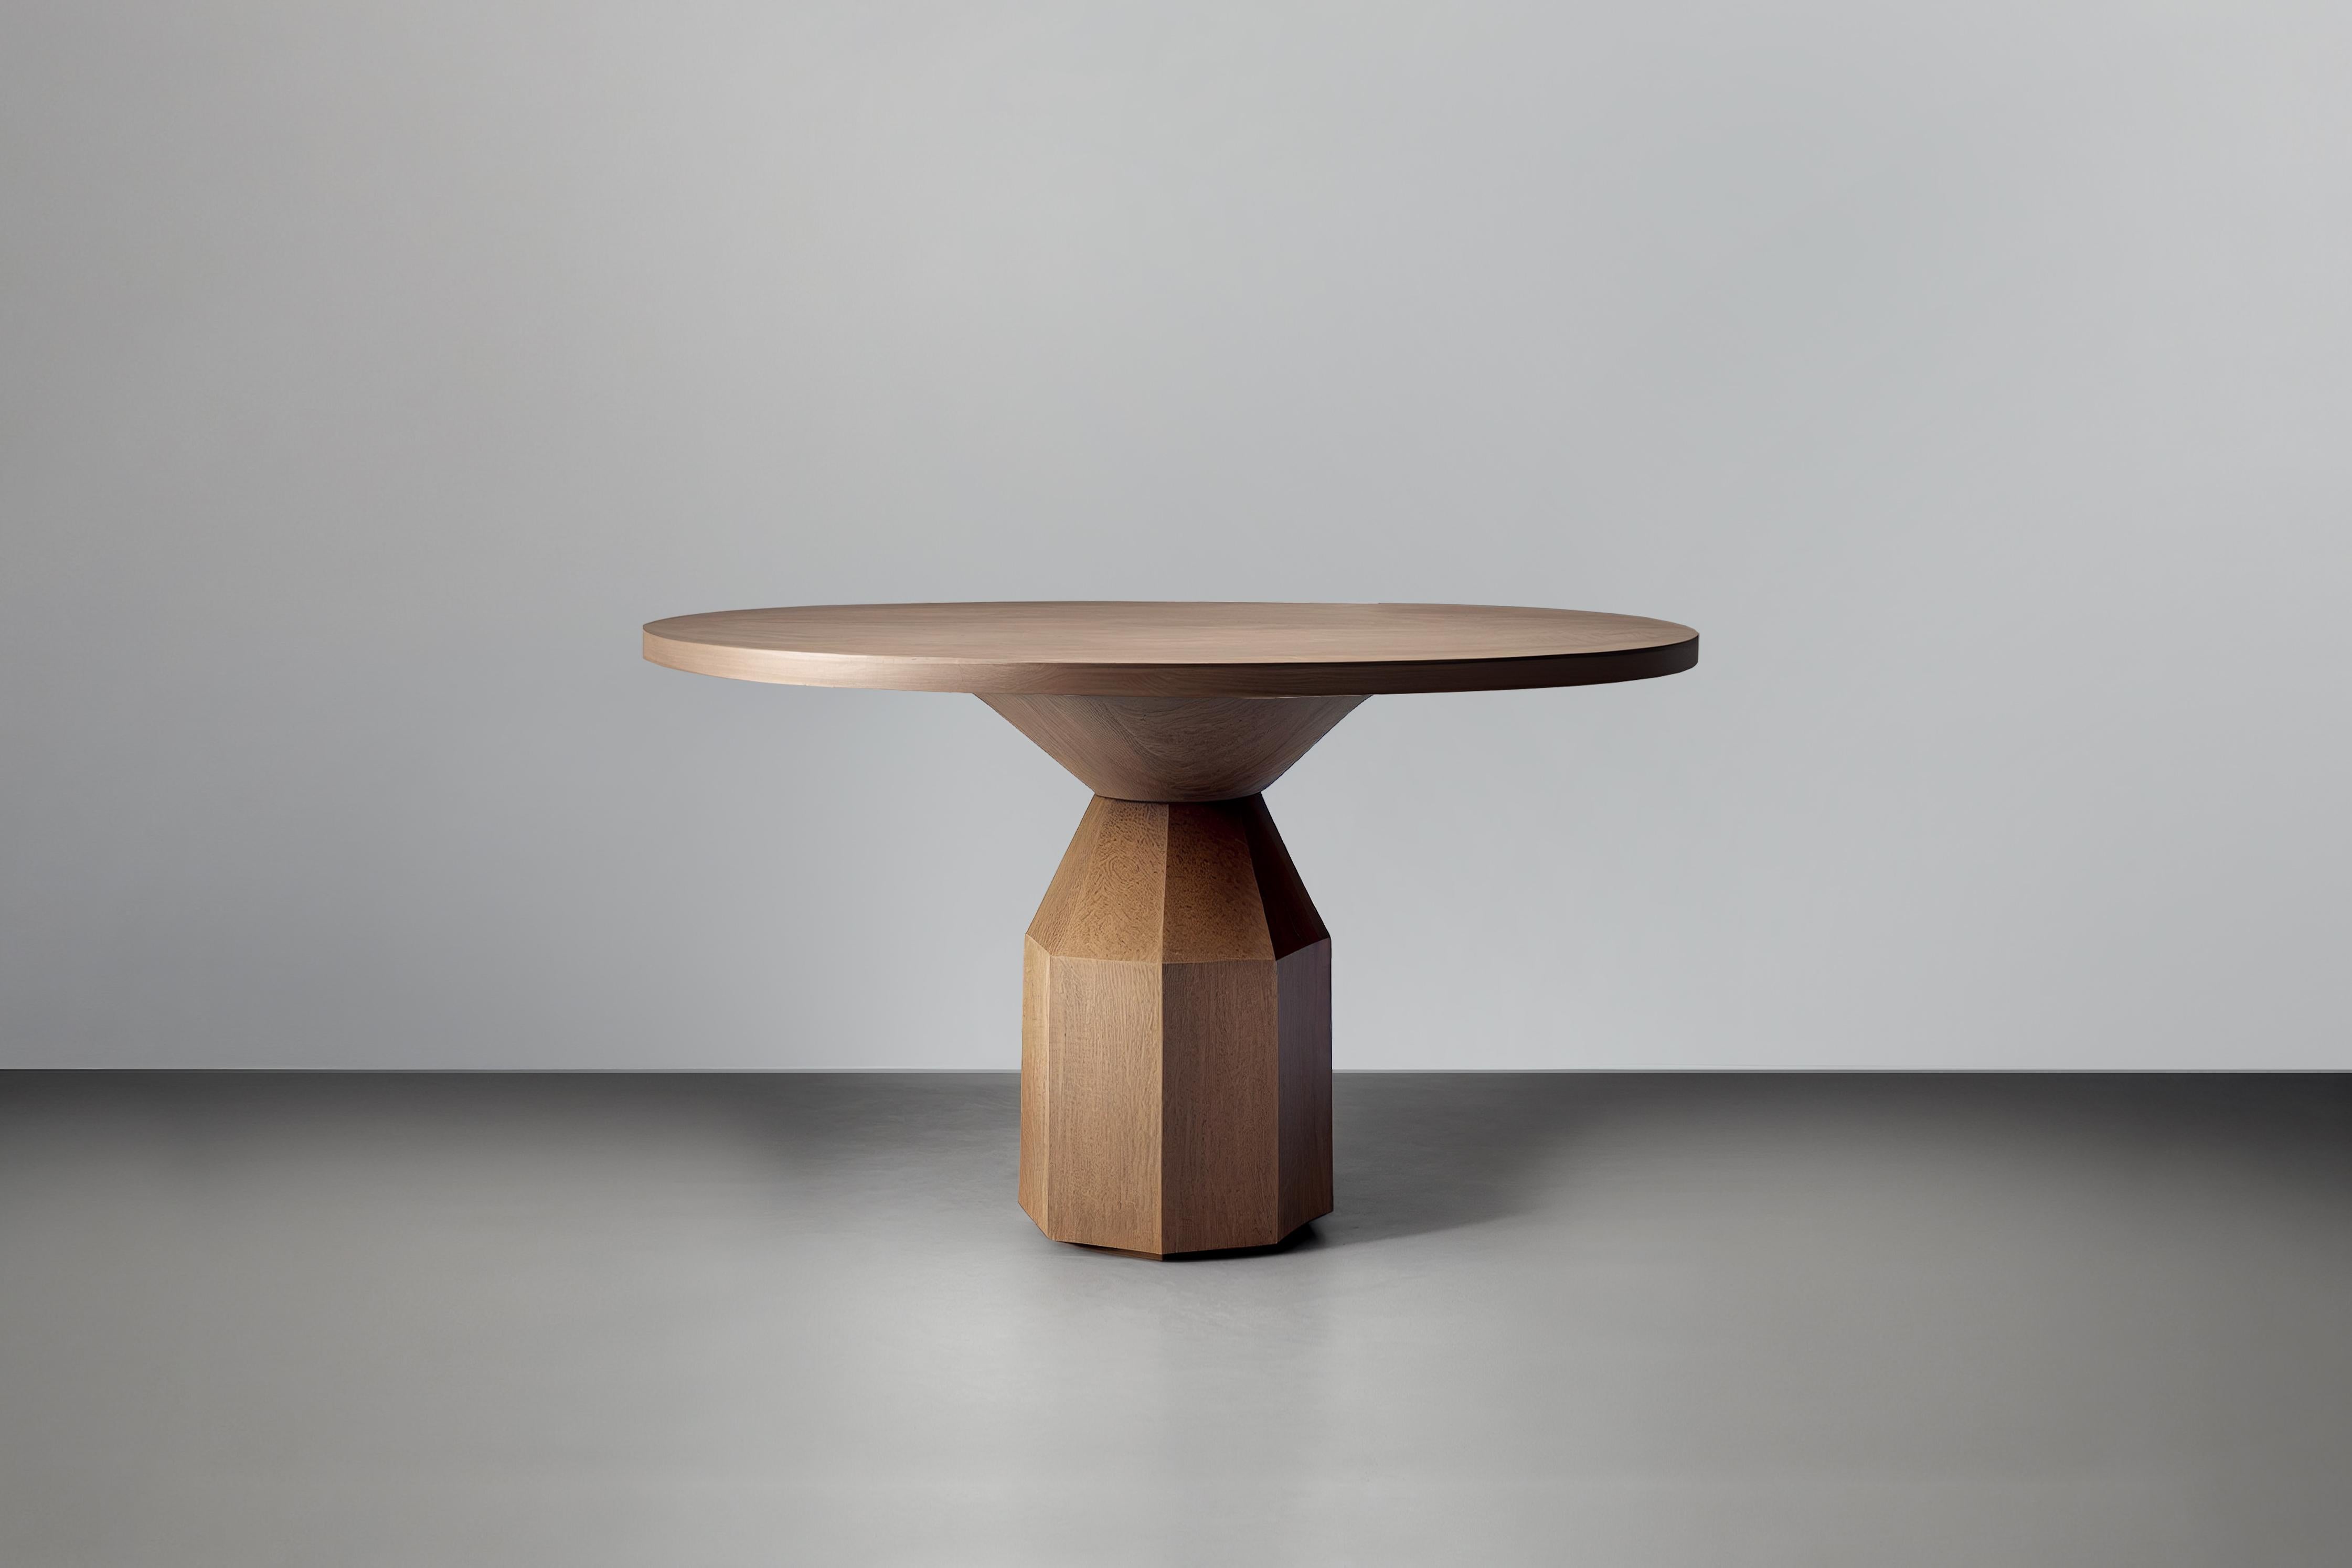 Moka dining table, round table for four by NONO.

The Moka dining table is a sculptural dining table collection inspired by the iconic Italian moka pot. Crafted from solid wood, its contemporary shapes is a design of the NONO Design Team. With a